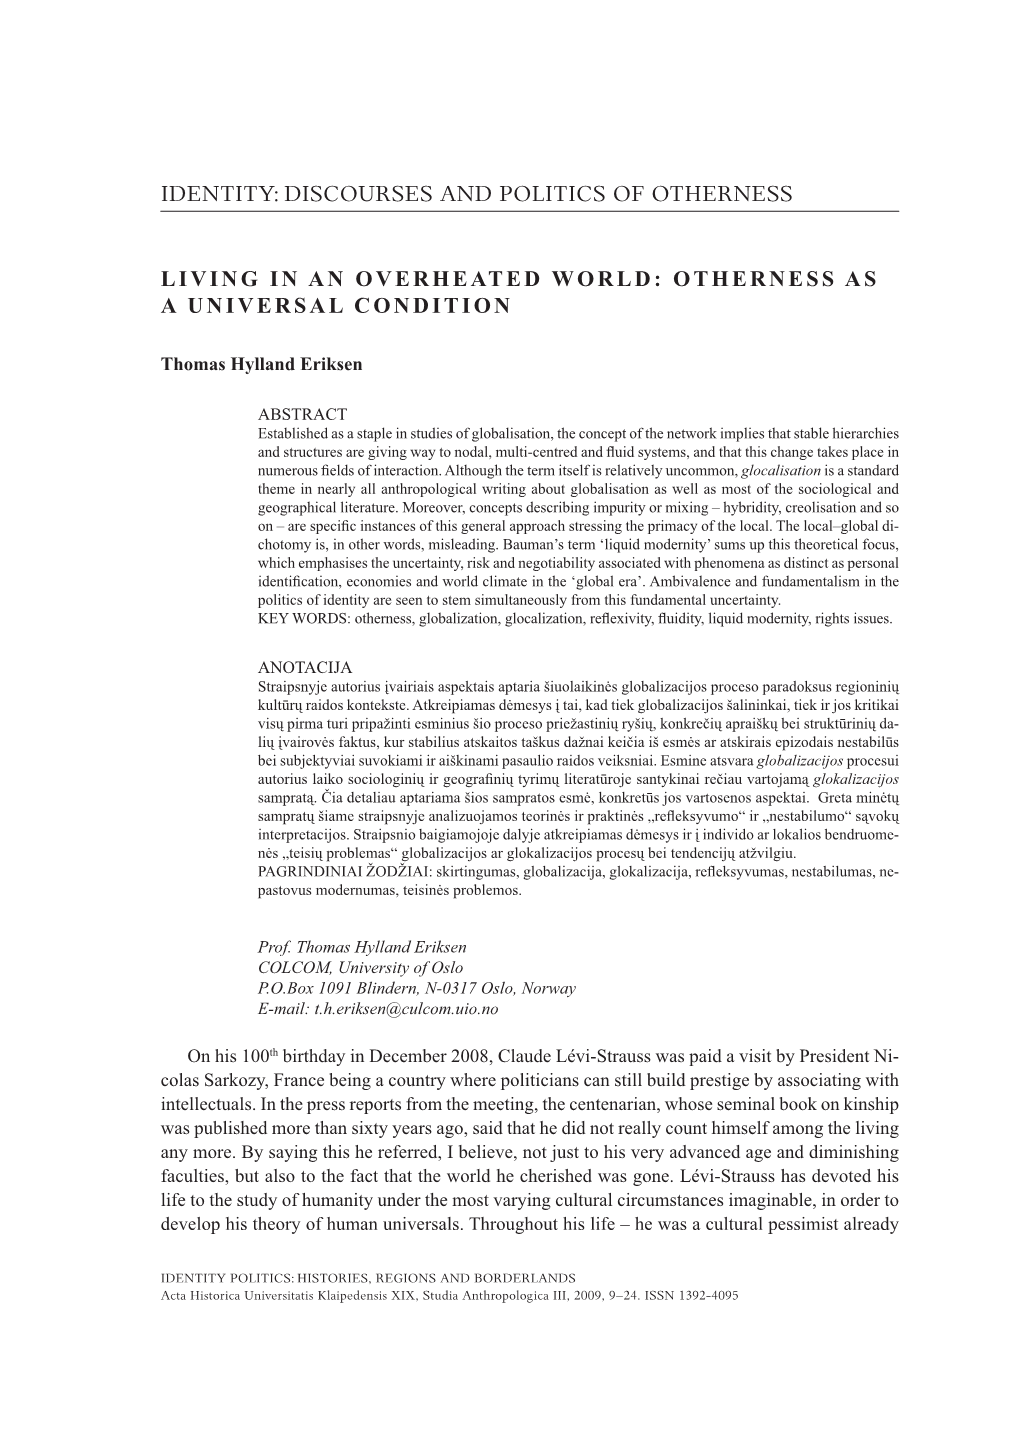 Thomas Hylland ERIKSEN – Living in an Overheated World: Otherness As